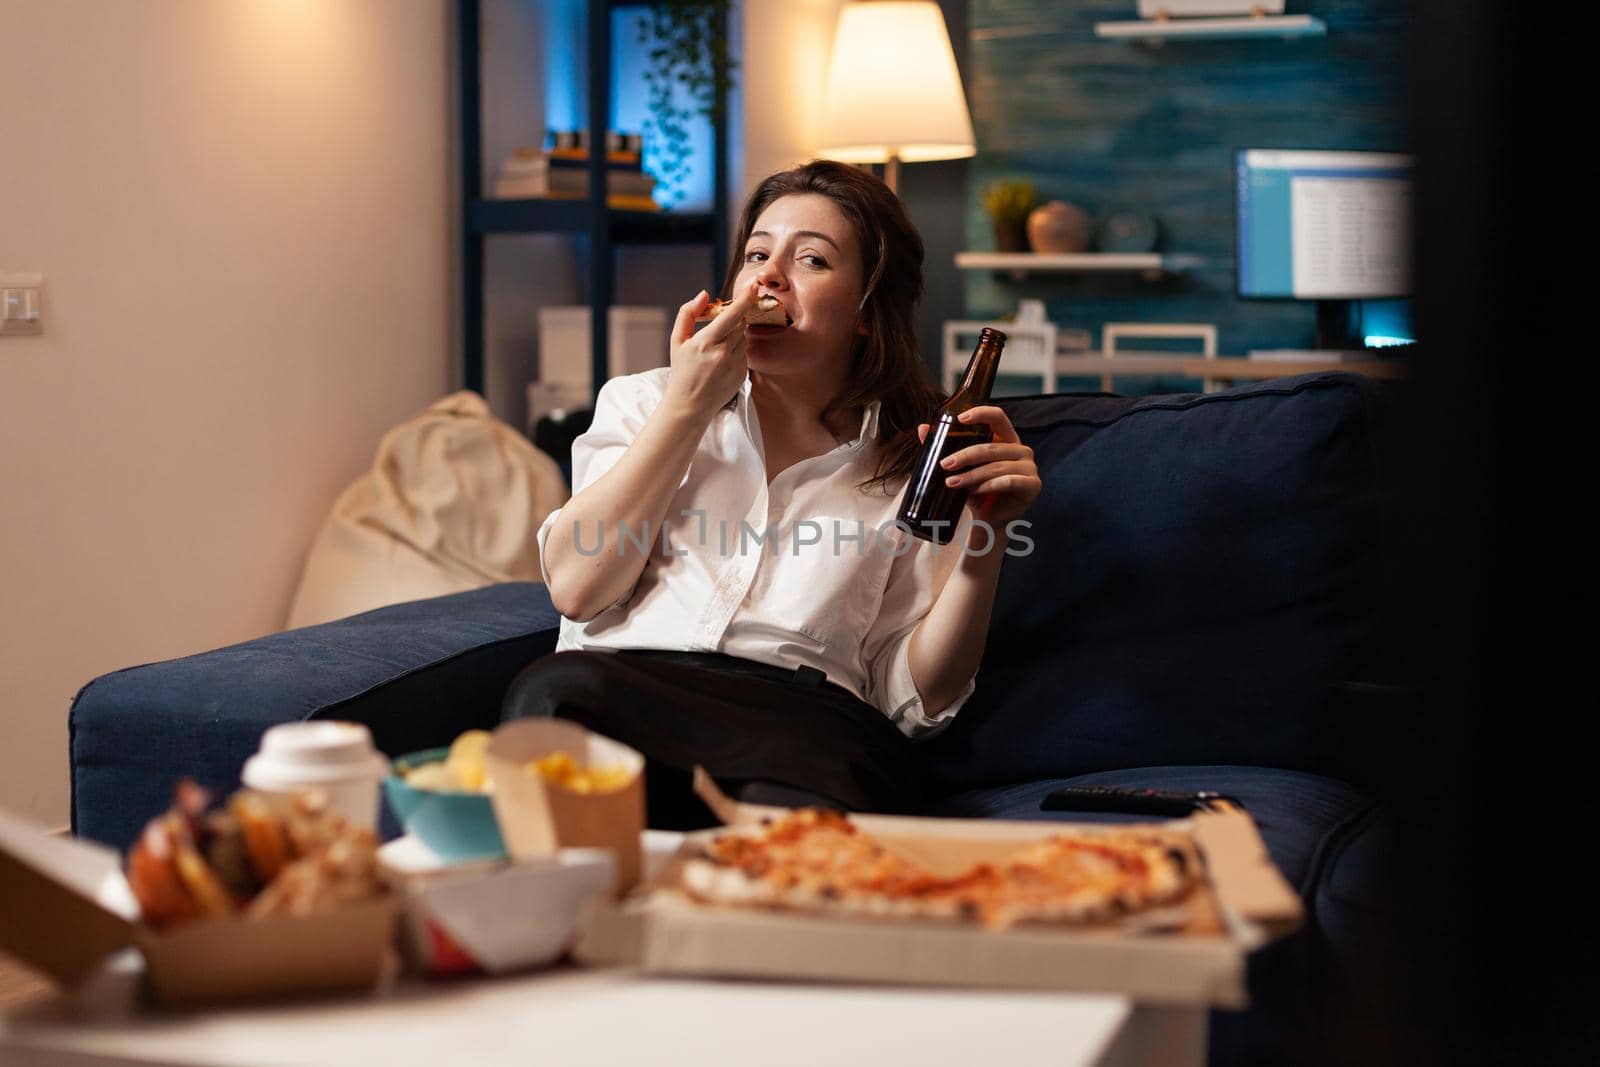 Happy woman eating tasty delicious delivery pizza slice relaxing on sofa watching comedy movie on television in living room. Caucasian female enjoying takeaway fast home delivered in evening